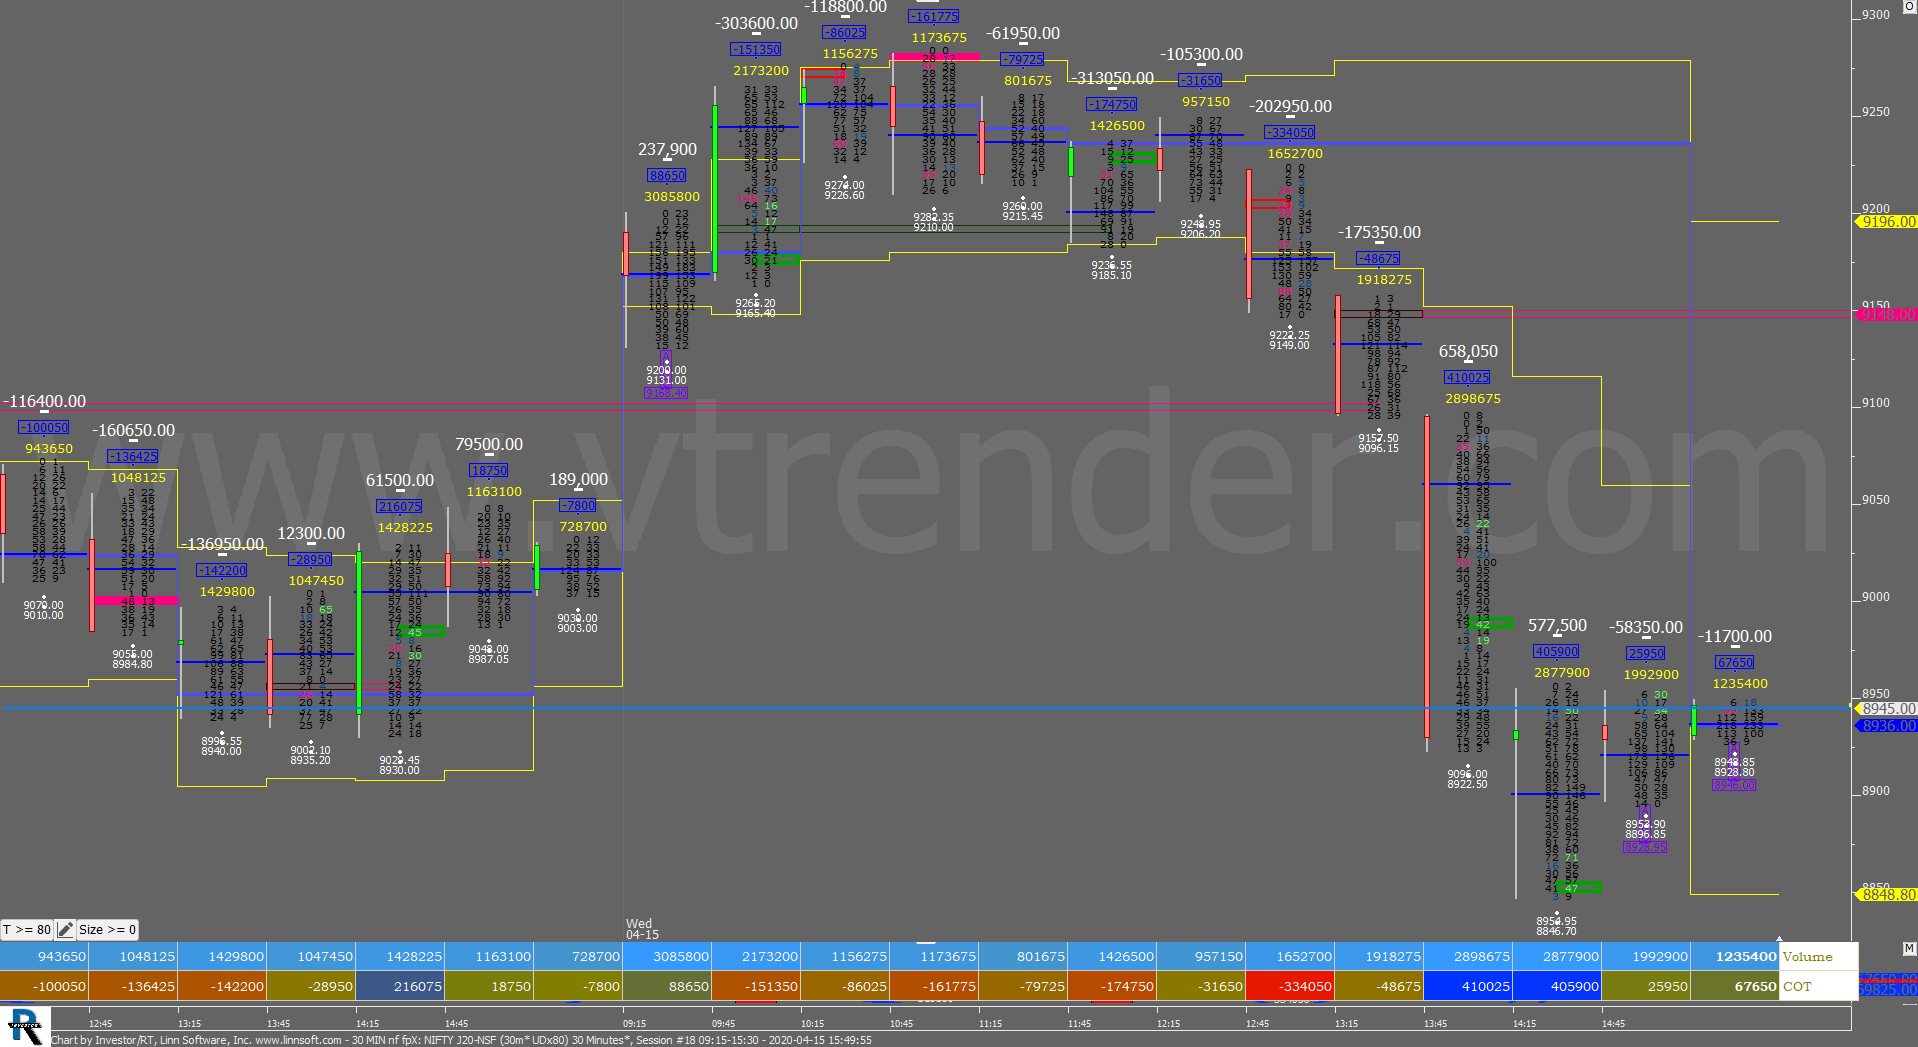 30 Min Nf Fpx 6 Order Flow Charts Dated 15Th Apr 2020 Banknifty Futures, Day Trading, Intraday Trading, Intraday Trading Strategies, Nifty Futures, Order Flow Analysis, Support And Resistance, Trading Strategies, Volume Profile Trading